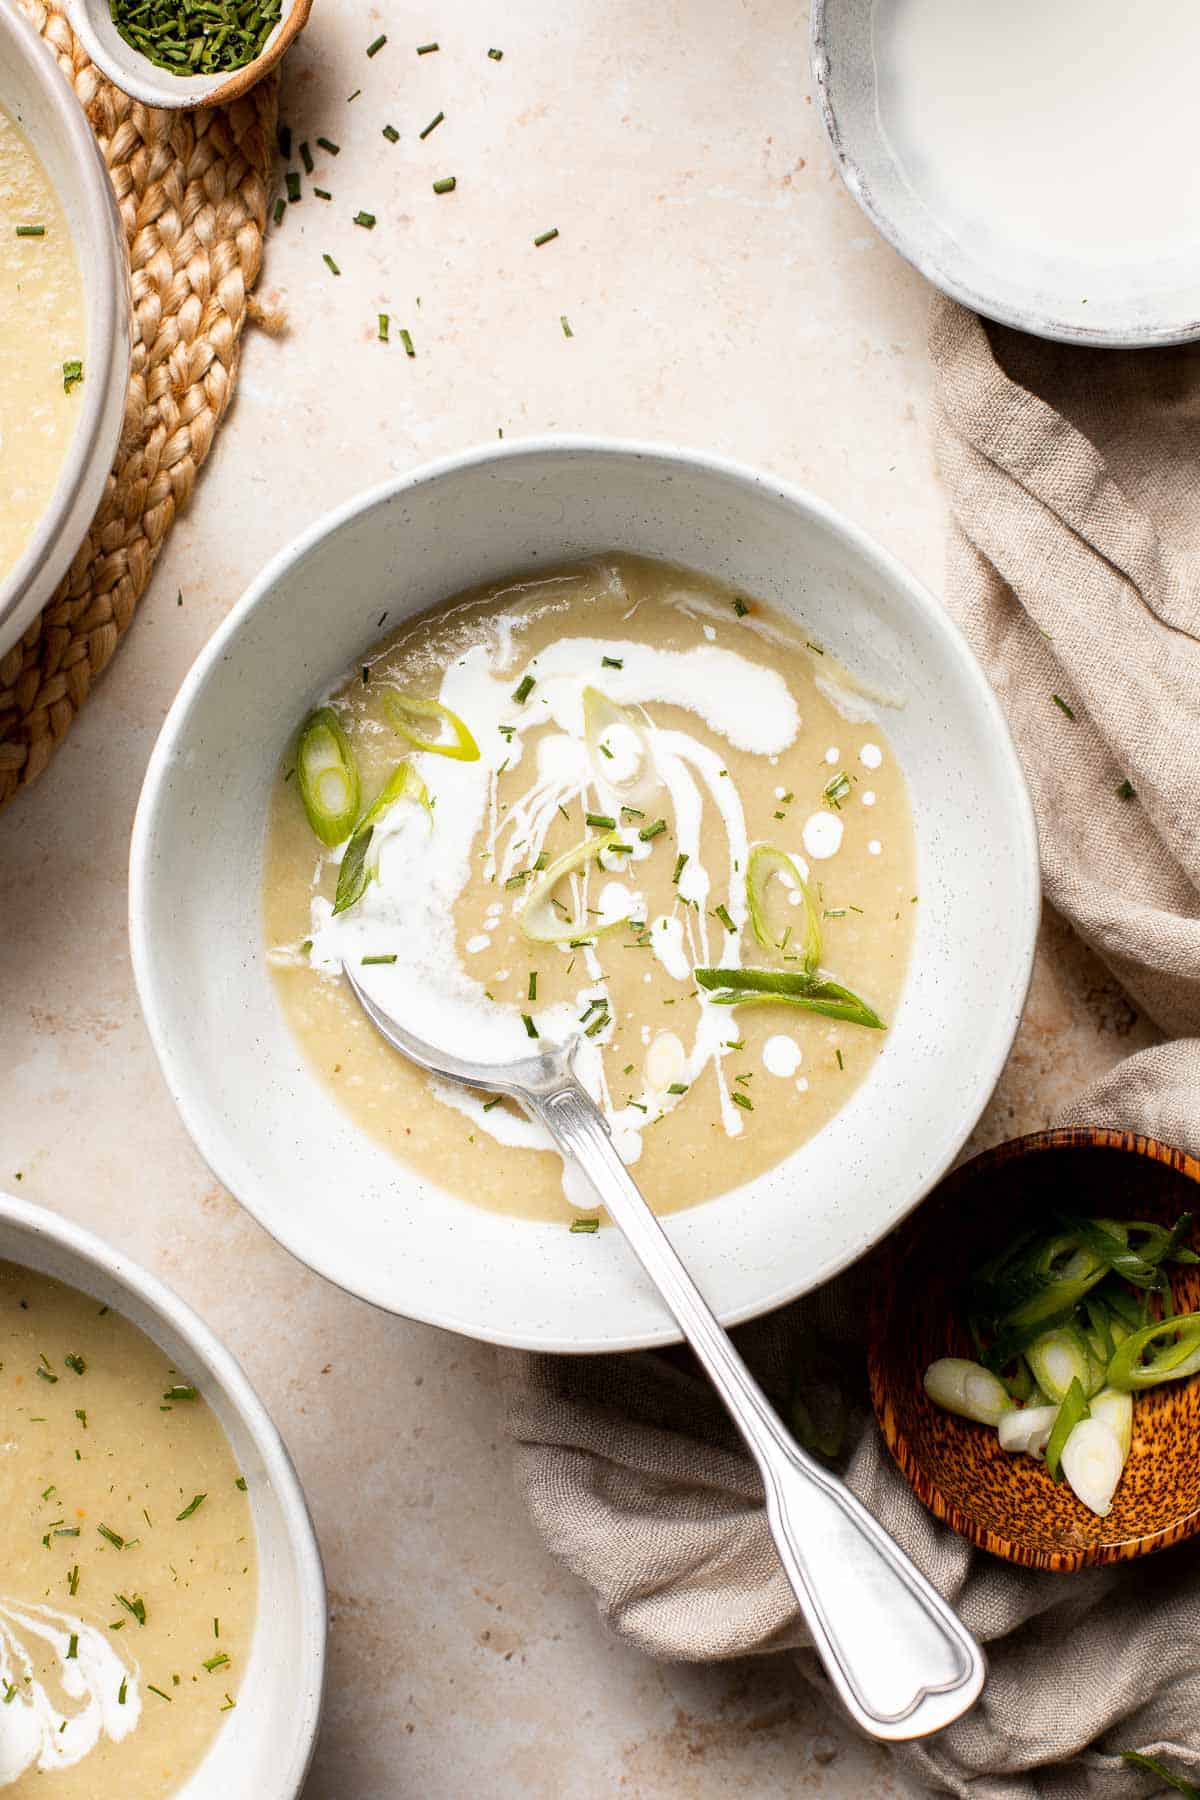 Creamy artichoke soup is rich, healthy, delicious, easy to make, and freezer-friendly. This vegetarian soup is loaded with artichokes, leeks, and potatoes. | aheadofthyme.com